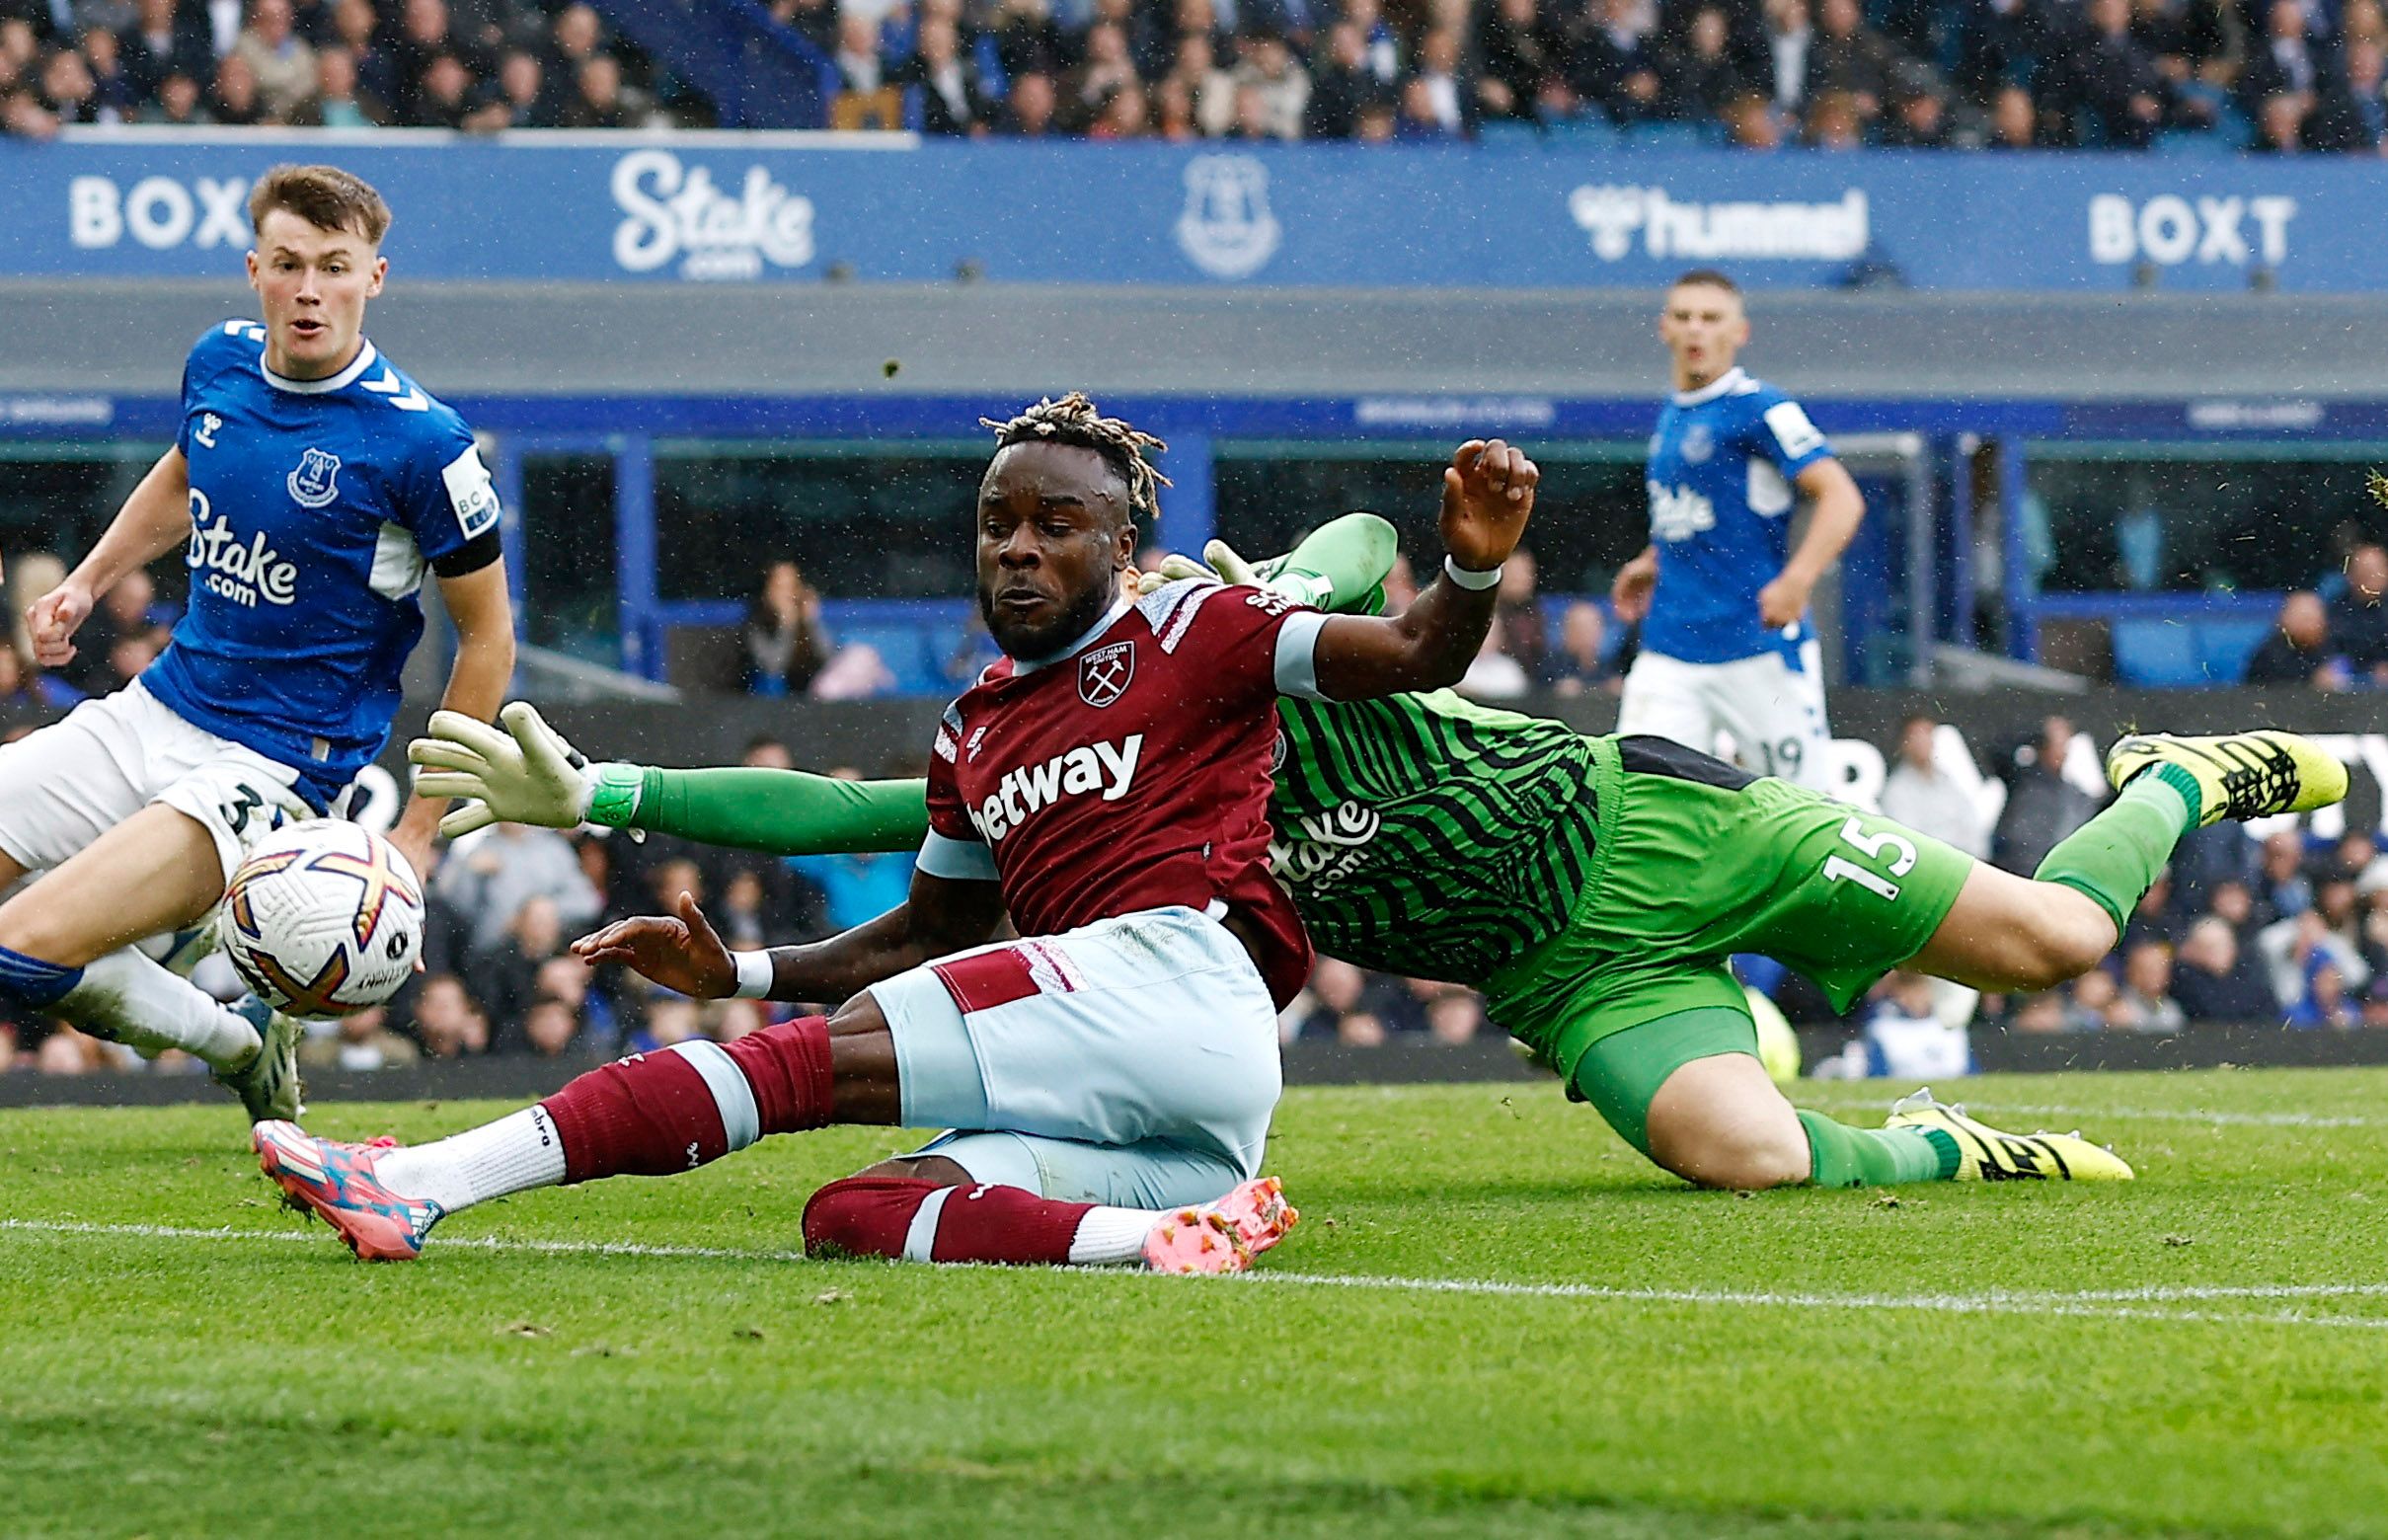 Soccer Football - Premier League - Everton v West Ham United - Goodison Park, Liverpool, Britain - September 18, 2022 West Ham United's Maxwel Cornet shoots at goal Action Images via Reuters/Jason Cairnduff EDITORIAL USE ONLY. No use with unauthorized audio, video, data, fixture lists, club/league logos or 'live' services. Online in-match use limited to 75 images, no video emulation. No use in betting, games or single club /league/player publications.  Please contact your account representative 